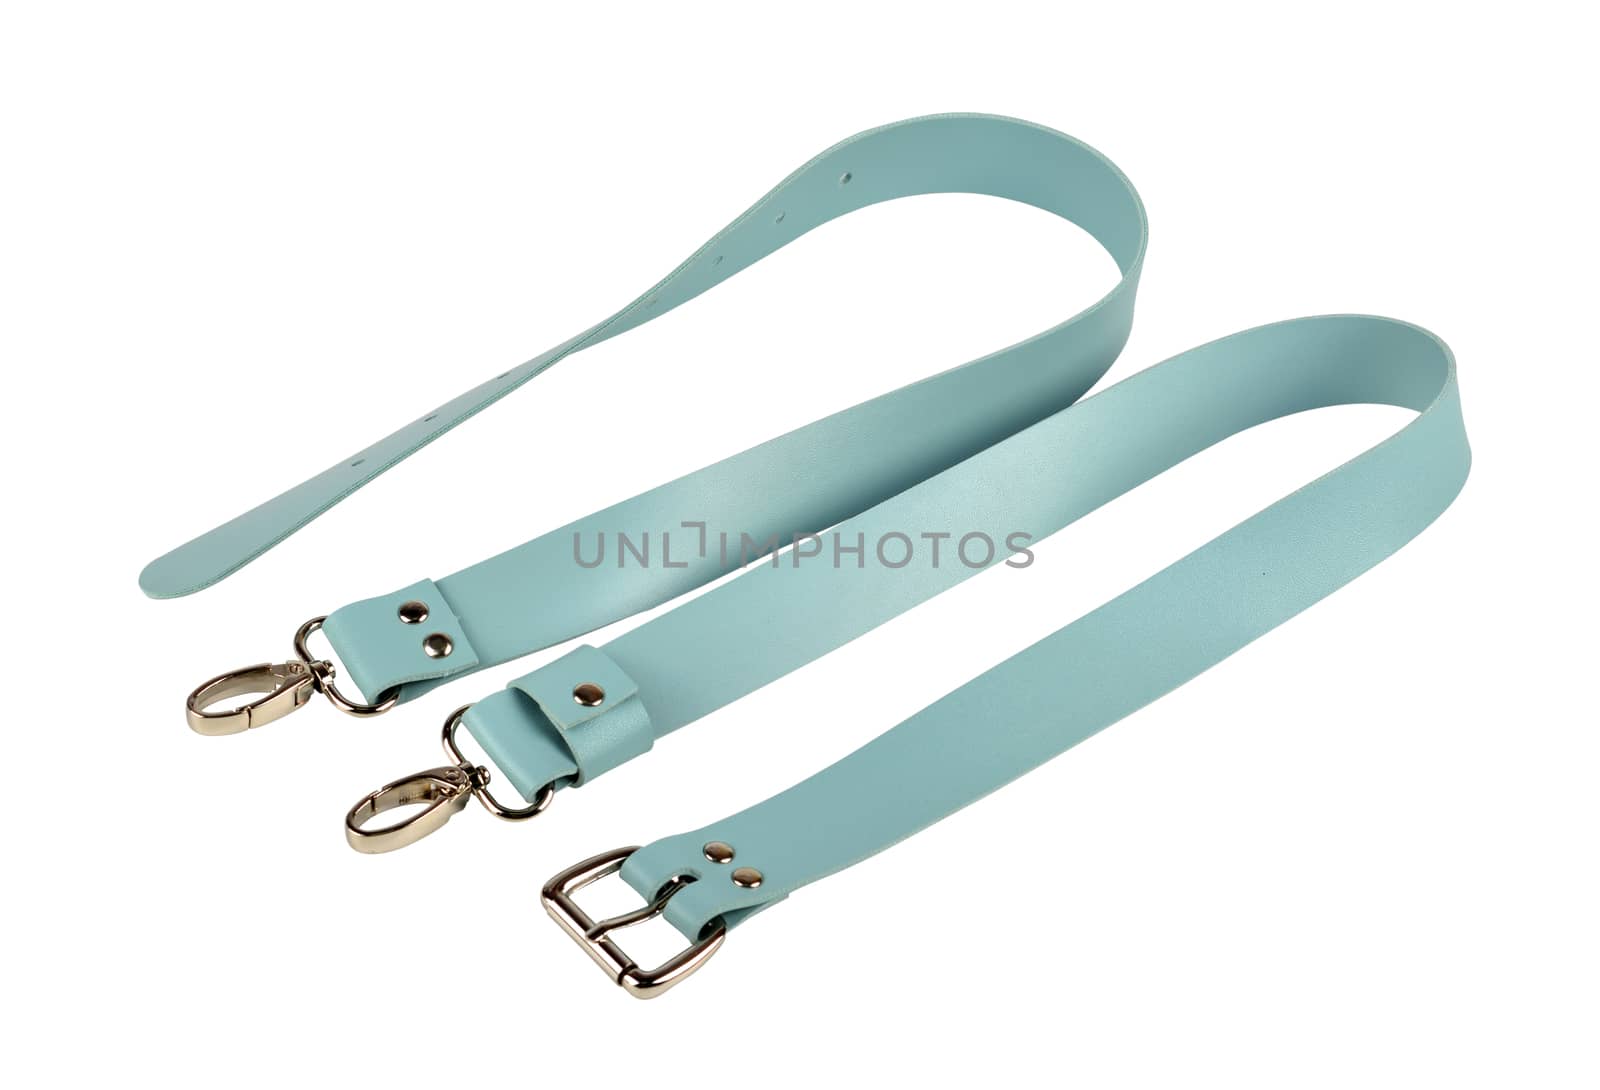 blue leather belt with carbine and metal accessories isolated on white background. use for bags and suitcases